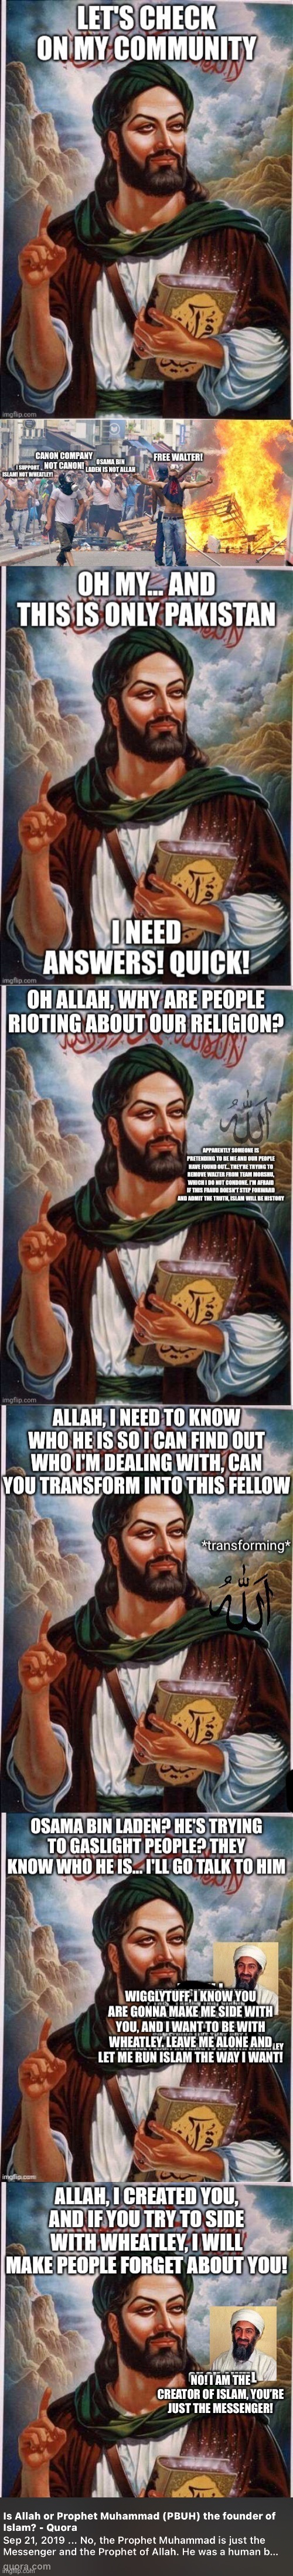 Quora to the rescue! | NO! I AM THE CREATOR OF ISLAM, YOU’RE JUST THE MESSENGER! | made w/ Imgflip meme maker